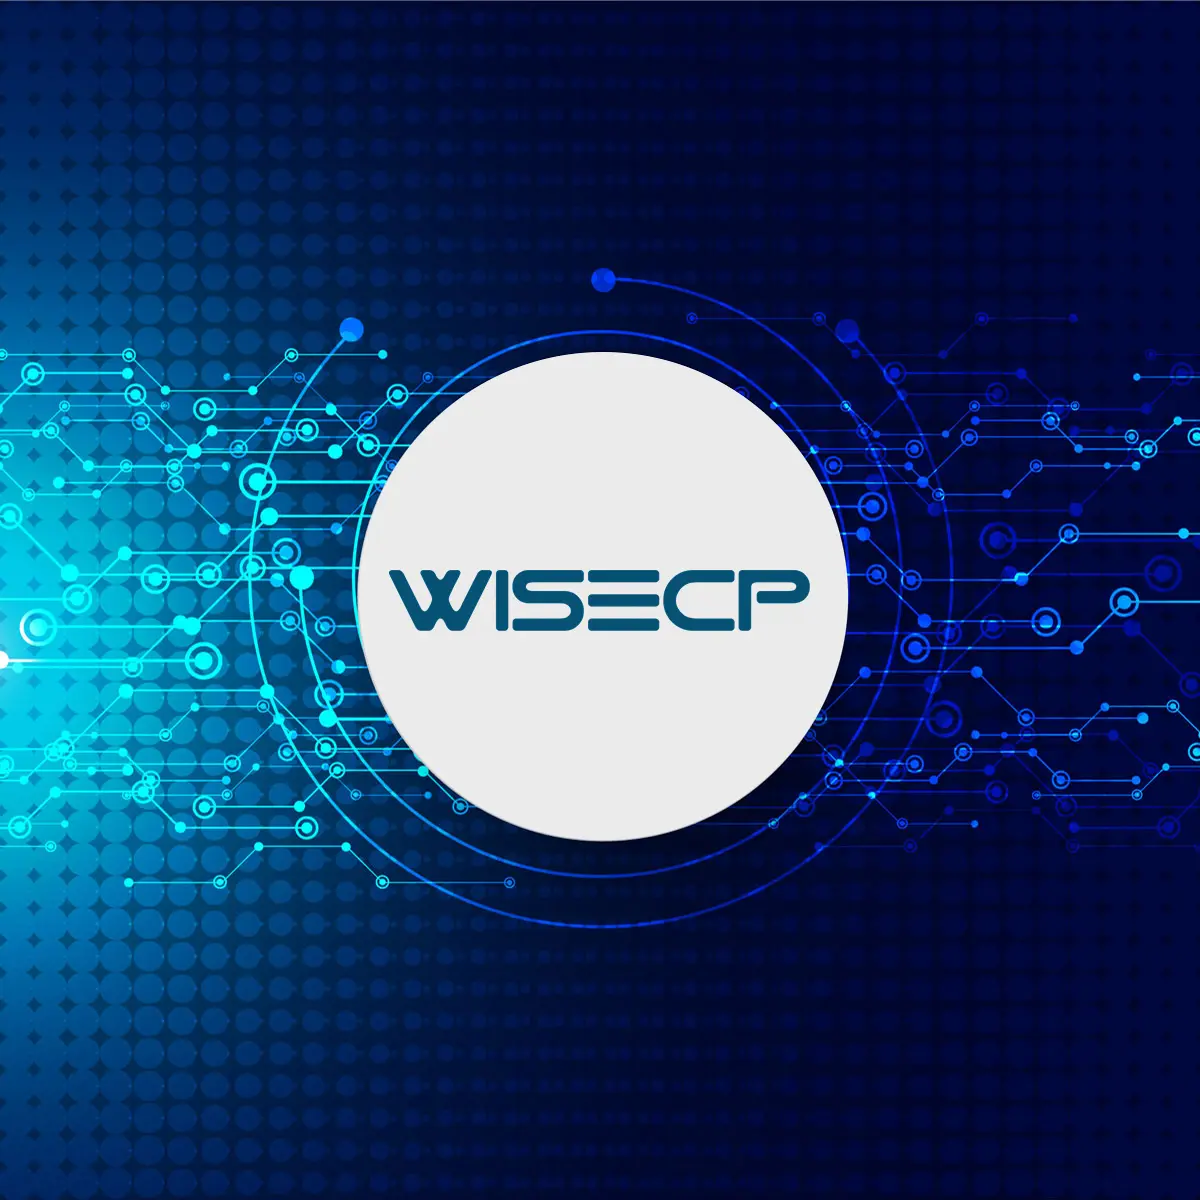 Professional WiseCP Services